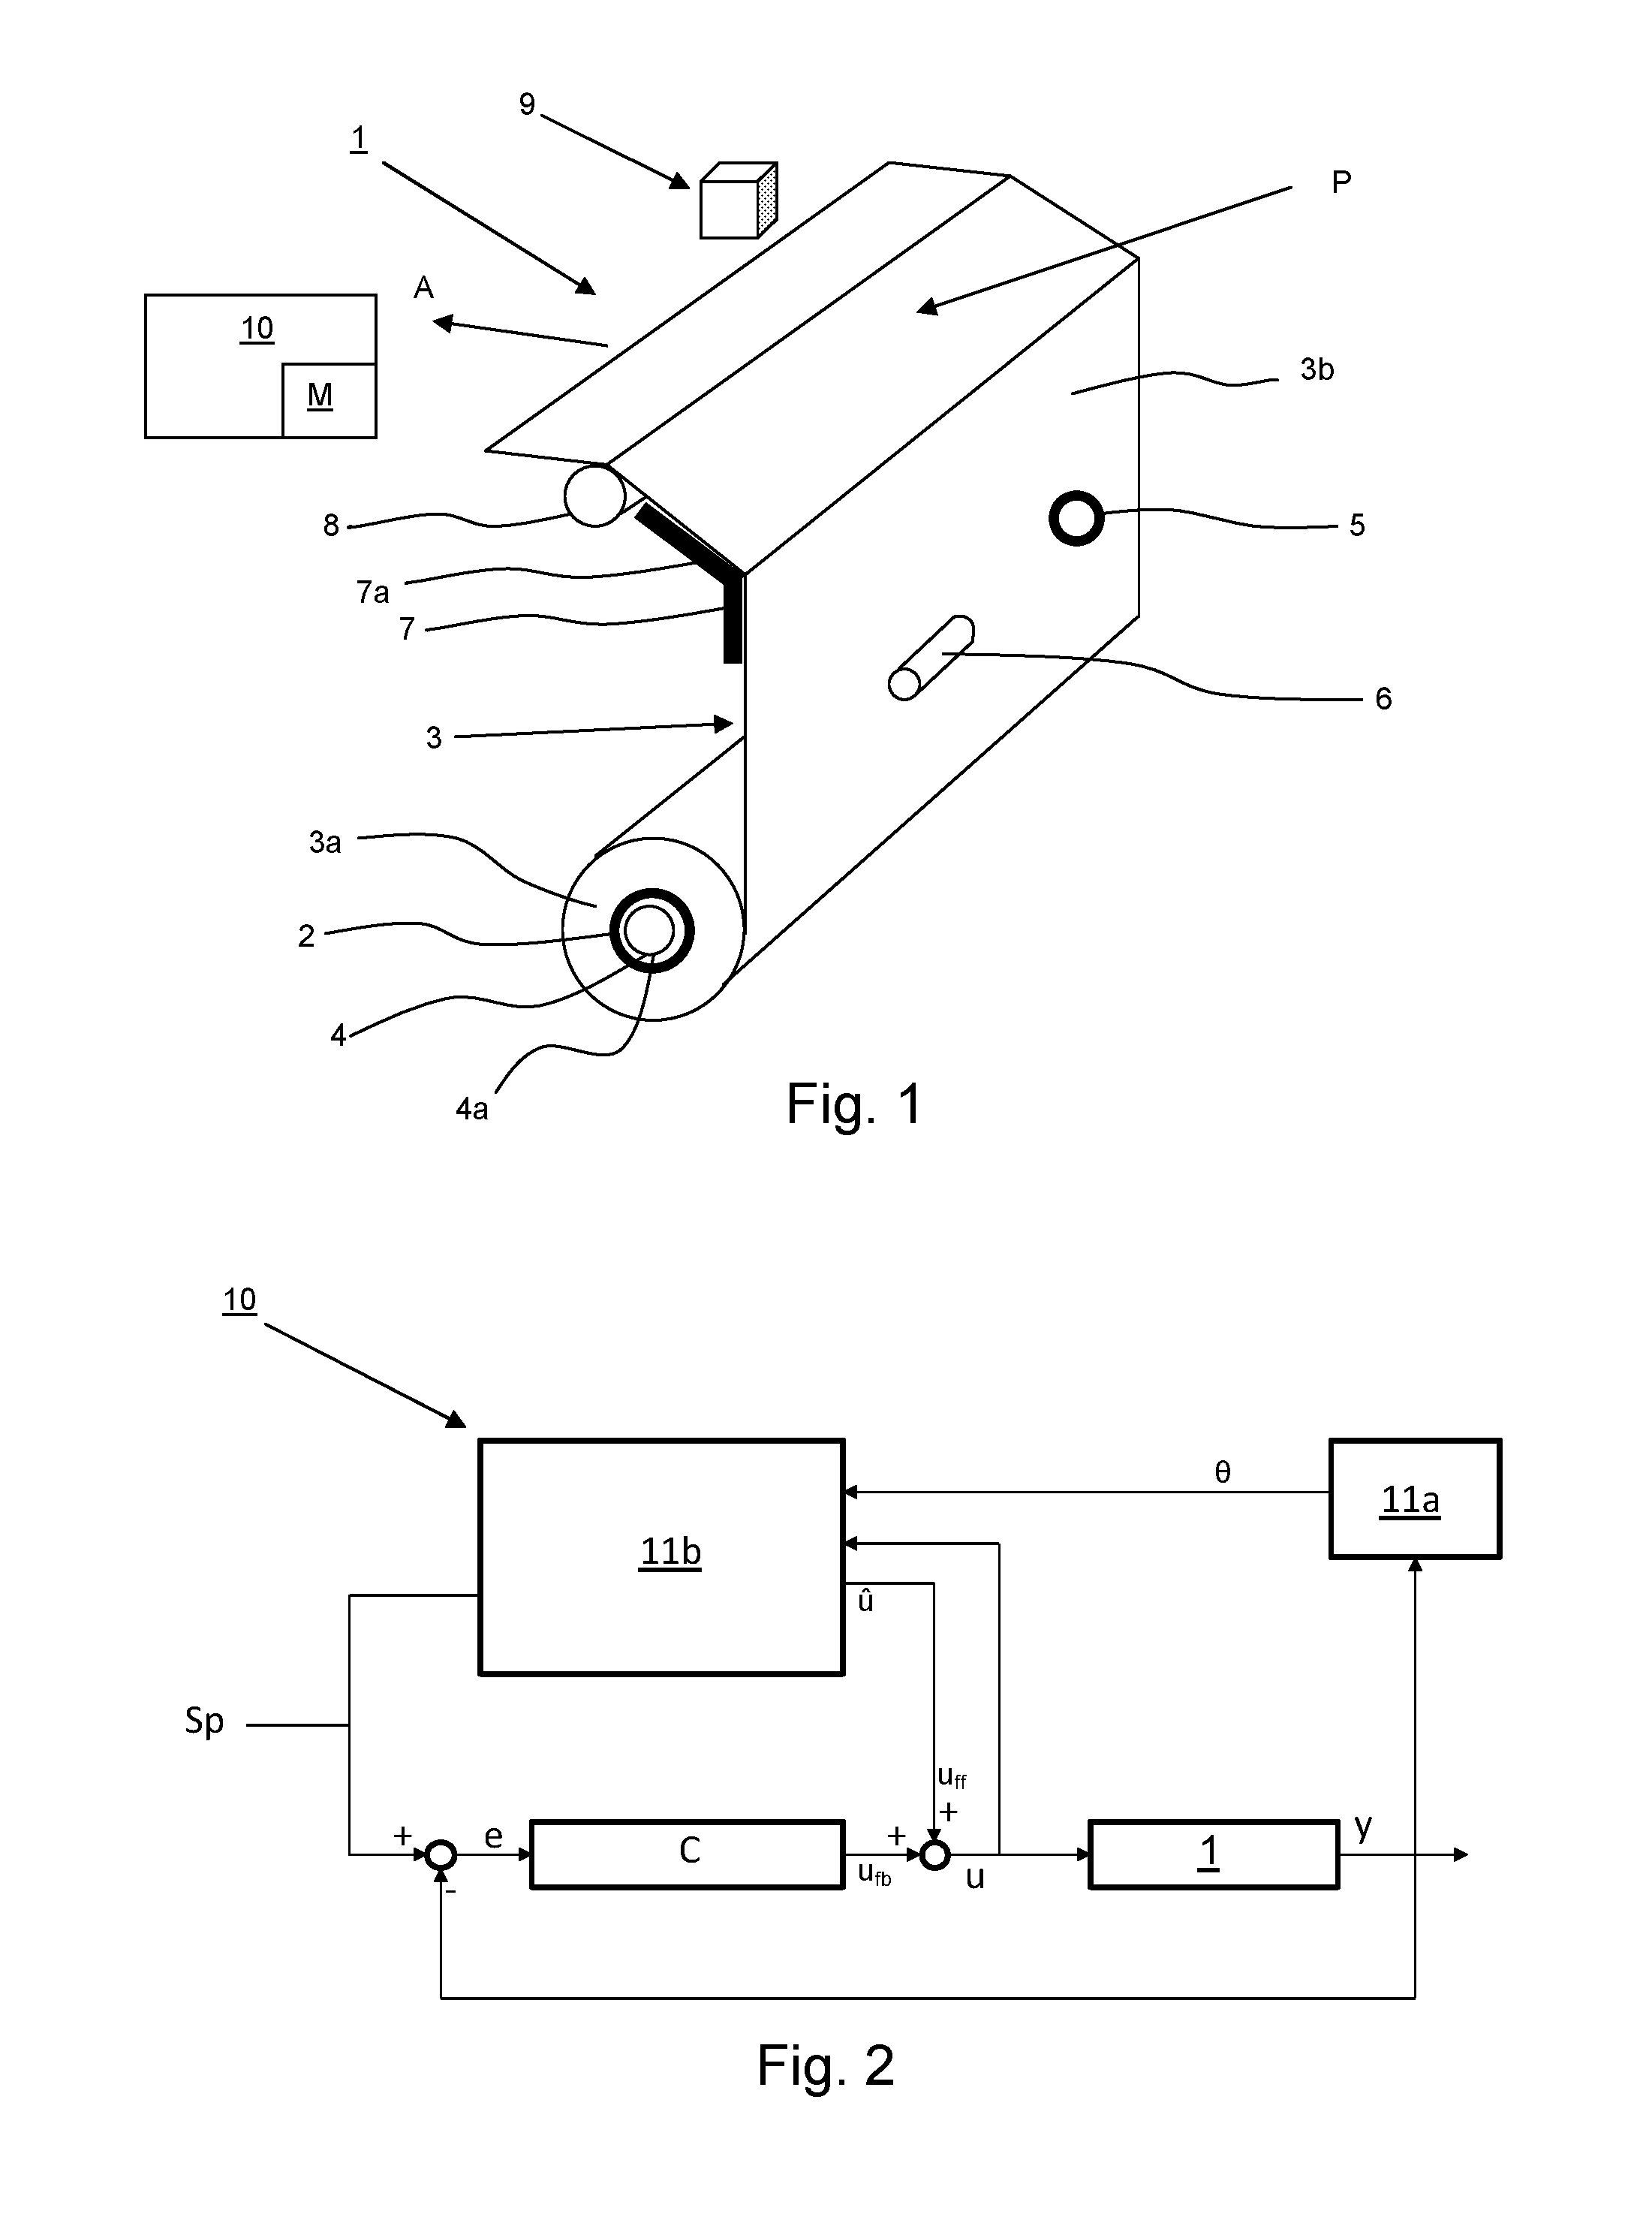 Imaging system for processing a media